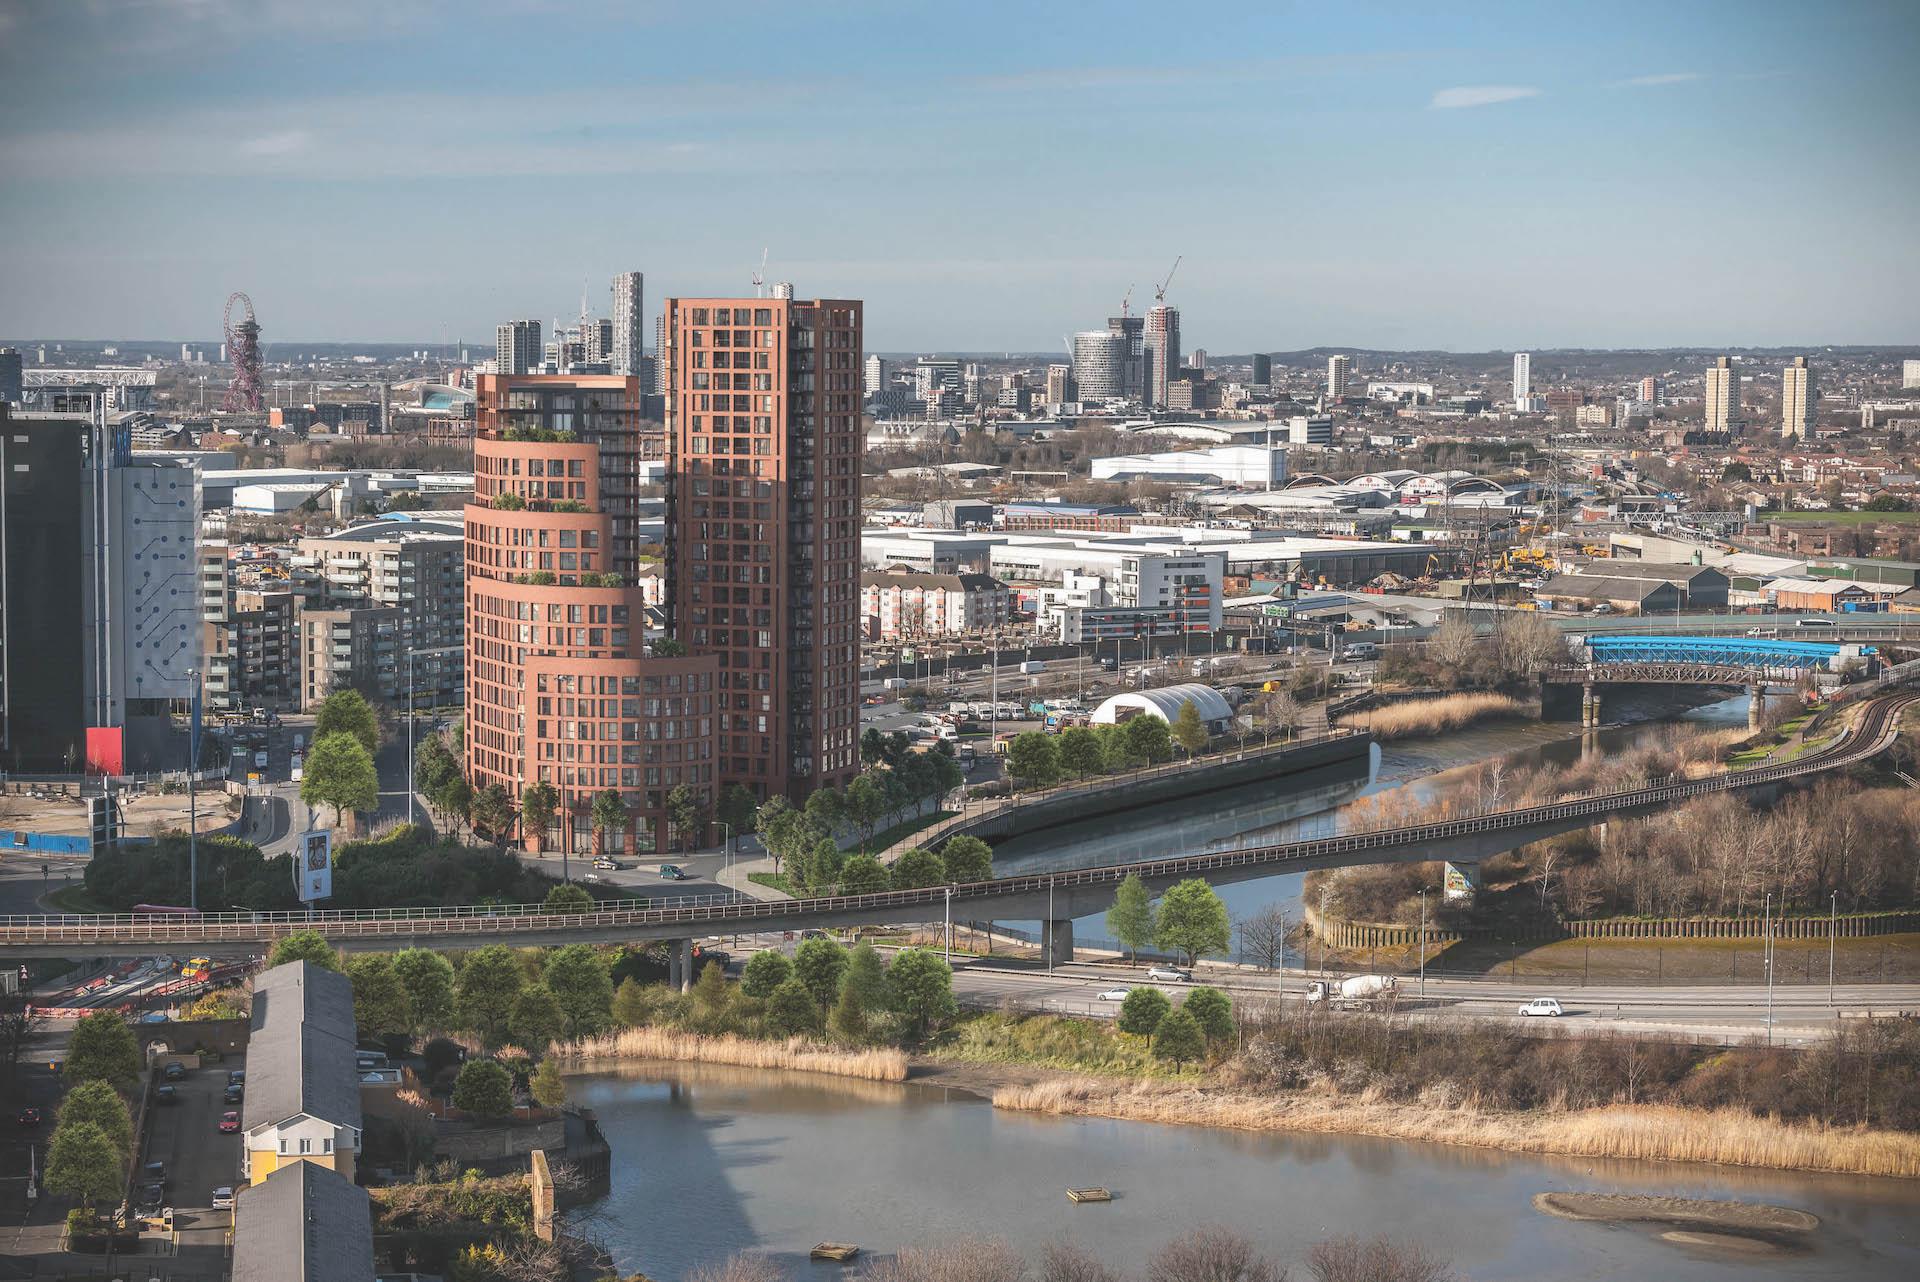 Orchard Wharf: The Epitome of Riverfront Living in East London